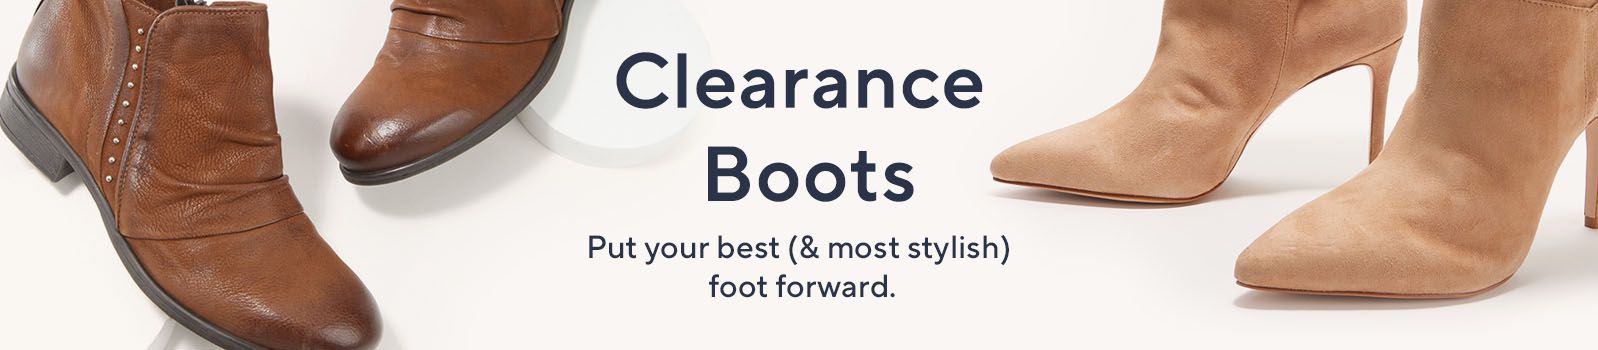 Clearance Boots. Put your best (& most stylish) foot forward.